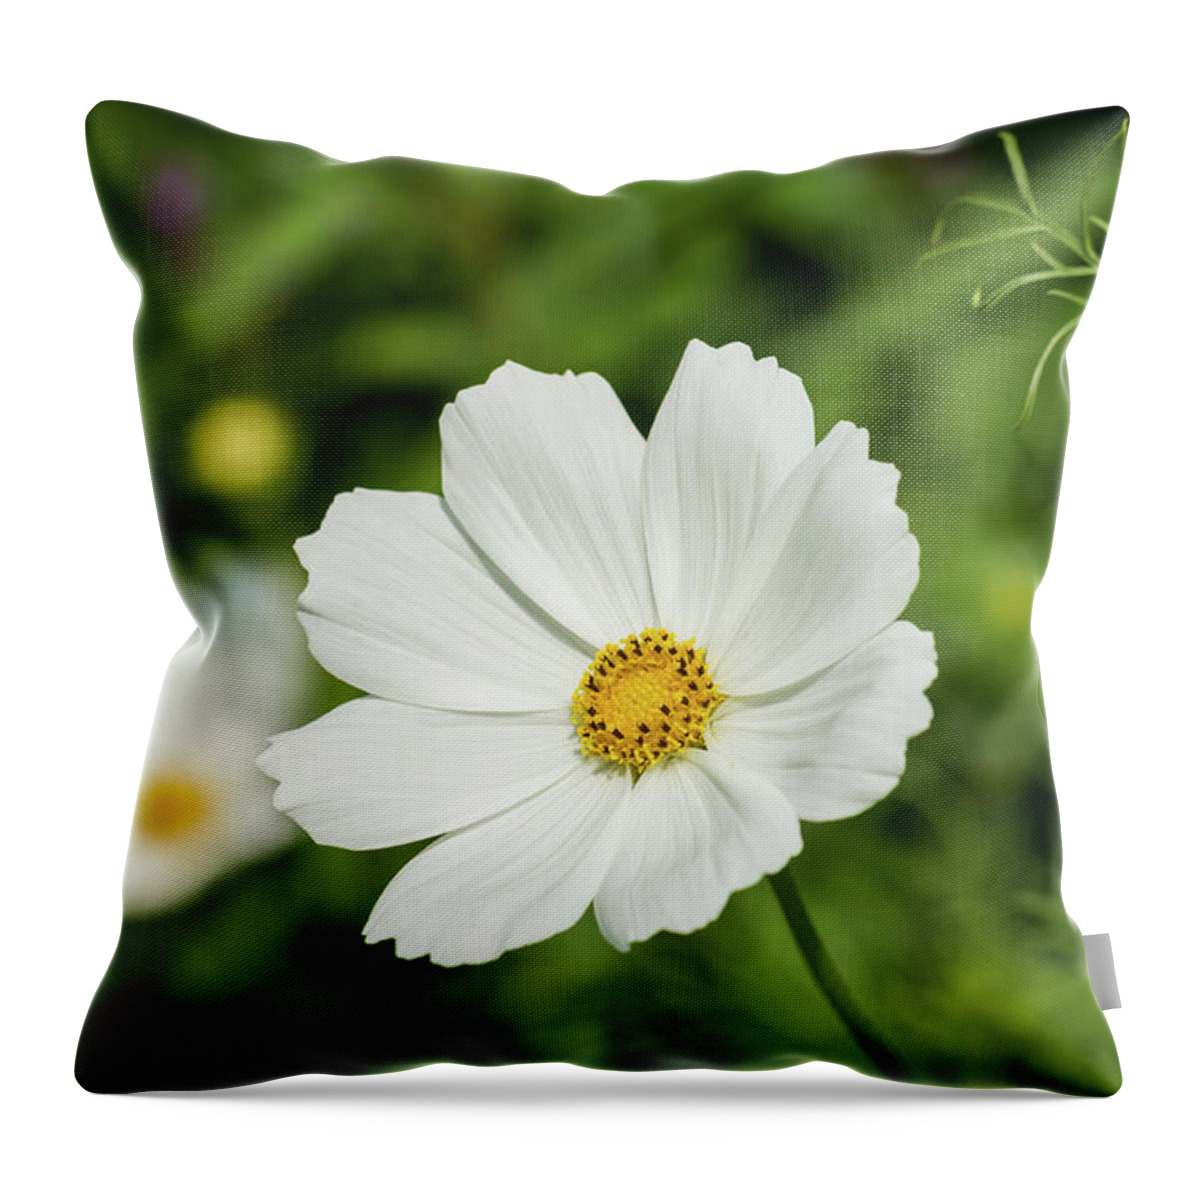 Cosmos Flower Throw Pillow featuring the photograph White Cosmos Bipinnatus by Tanya C Smith